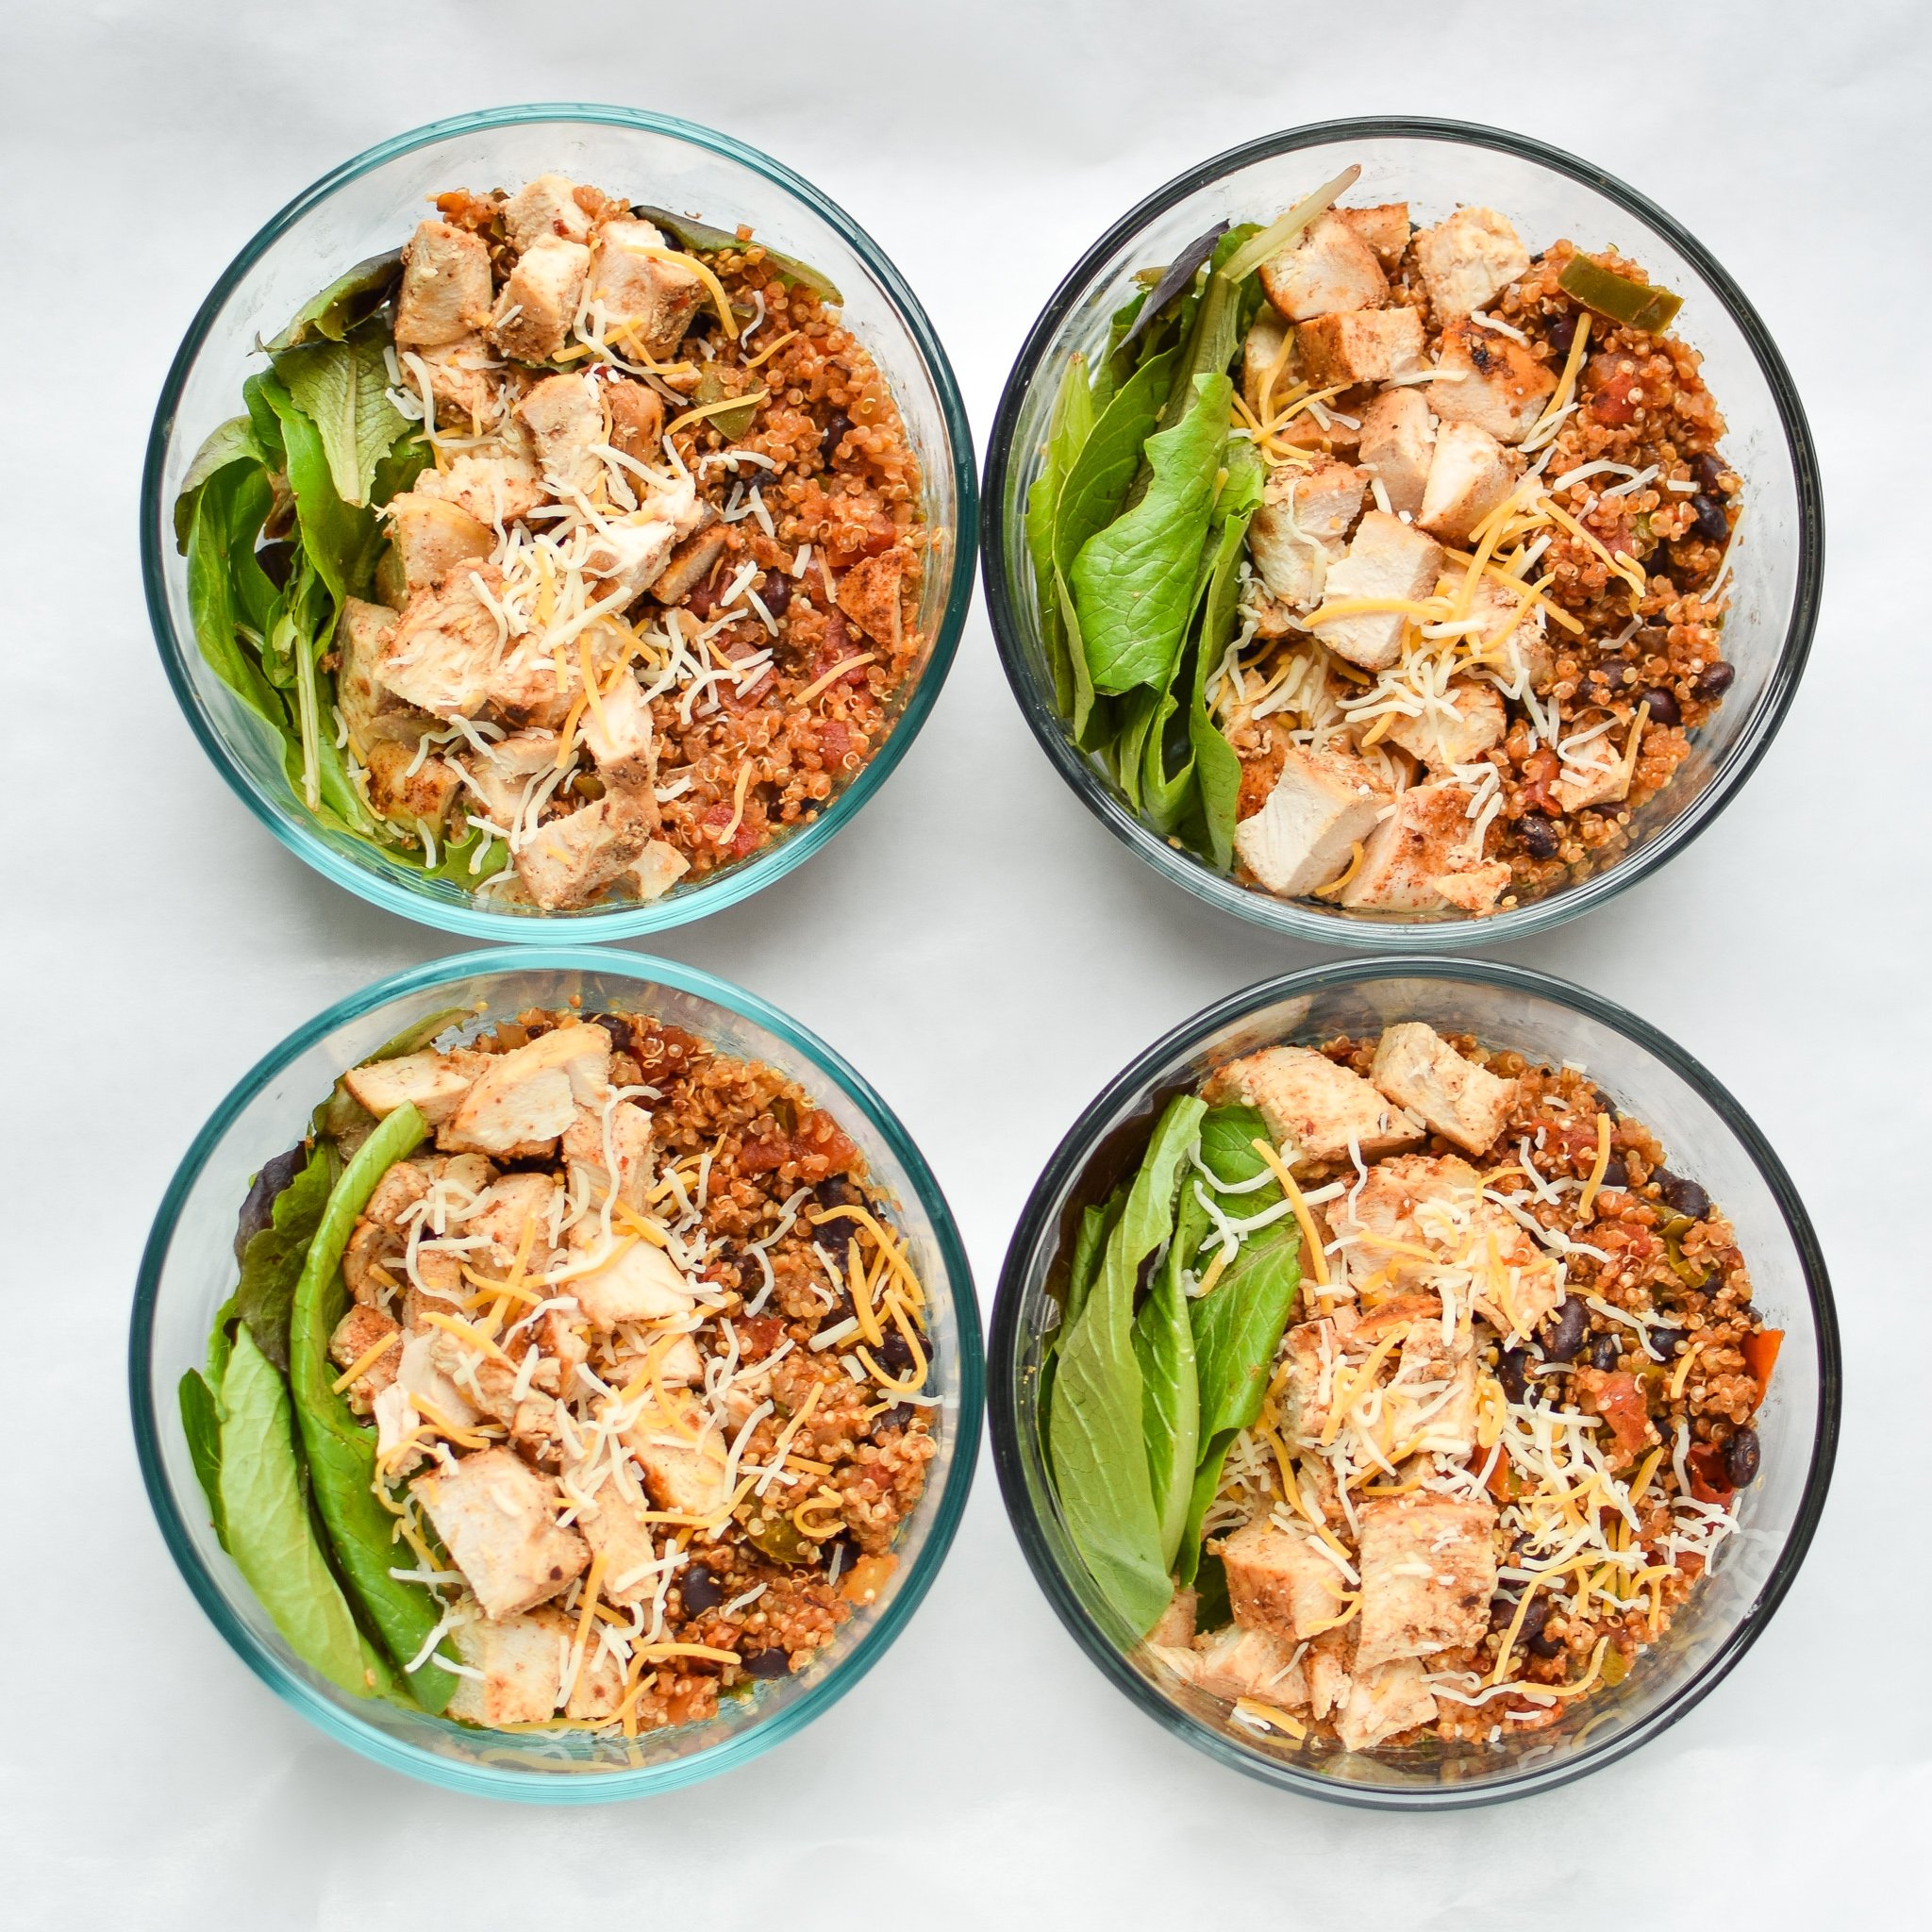 Mexican quinoa chicken salad lunch bowls viewed from above. Chicken breast, mexican quinoa and greens with cheese sprinkled on top in four Pyrex bowls.